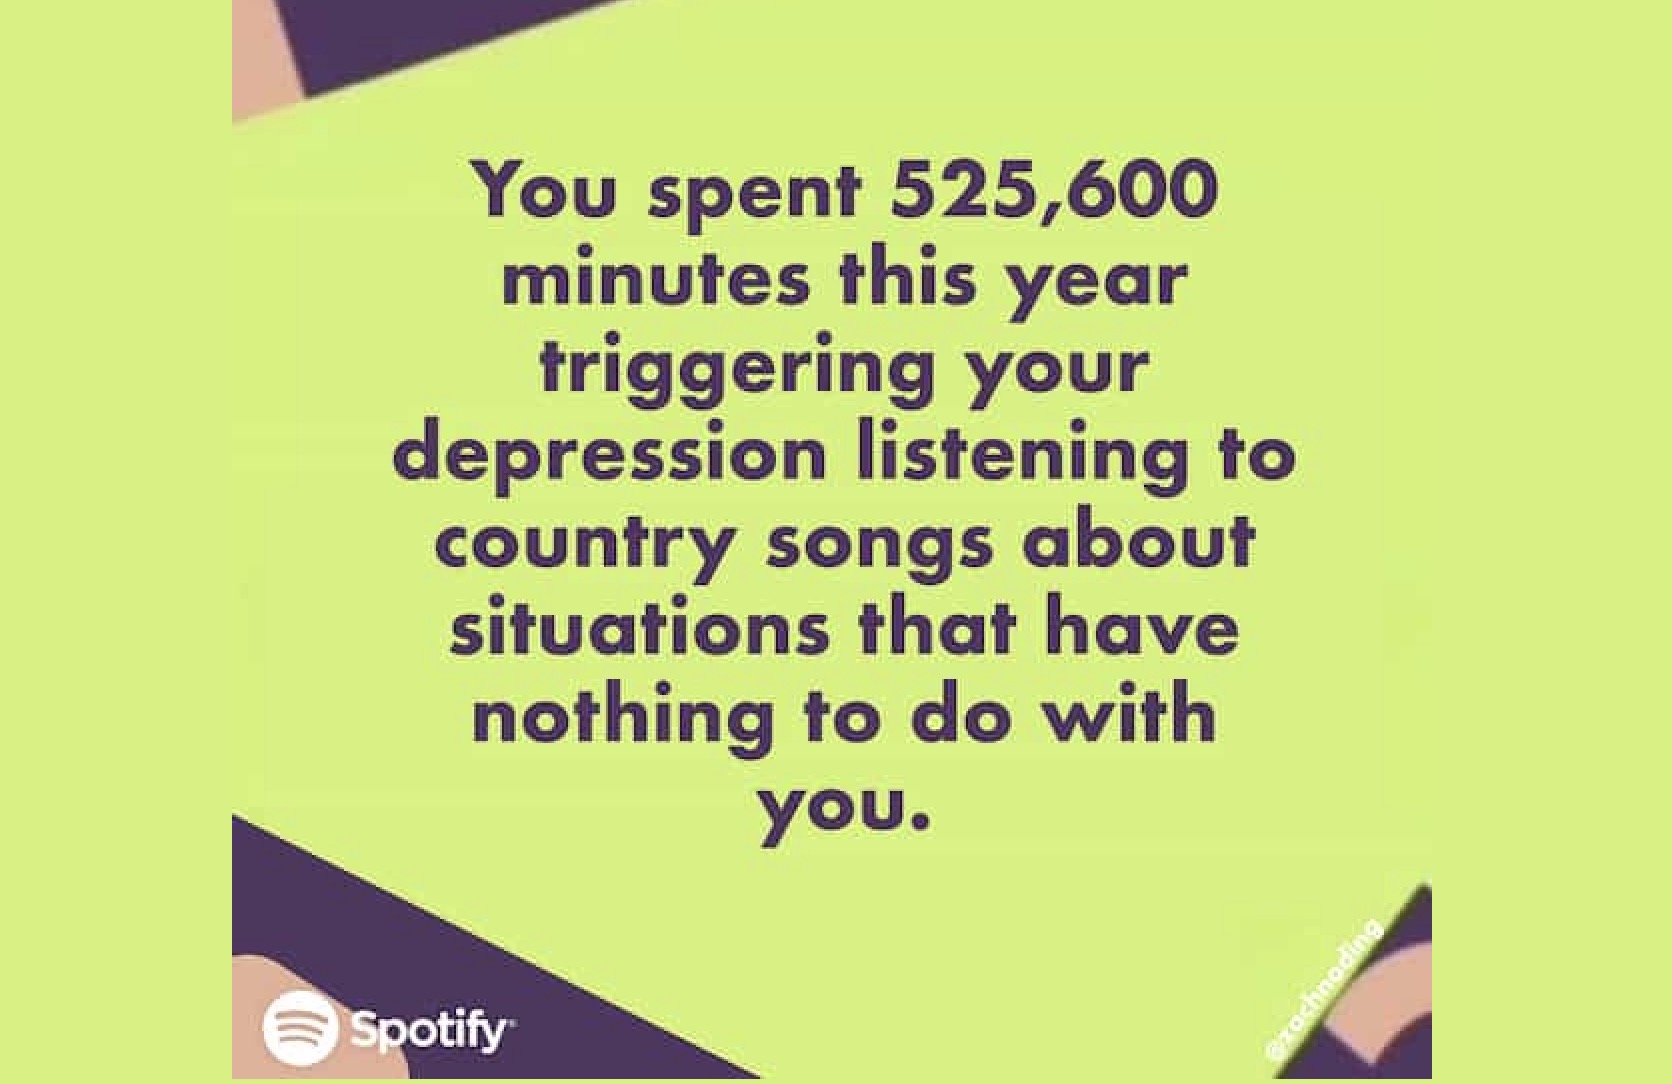 You spent 525,600 minutes this year triggering your depression listening to country songs about situations that have nothing to do with you.